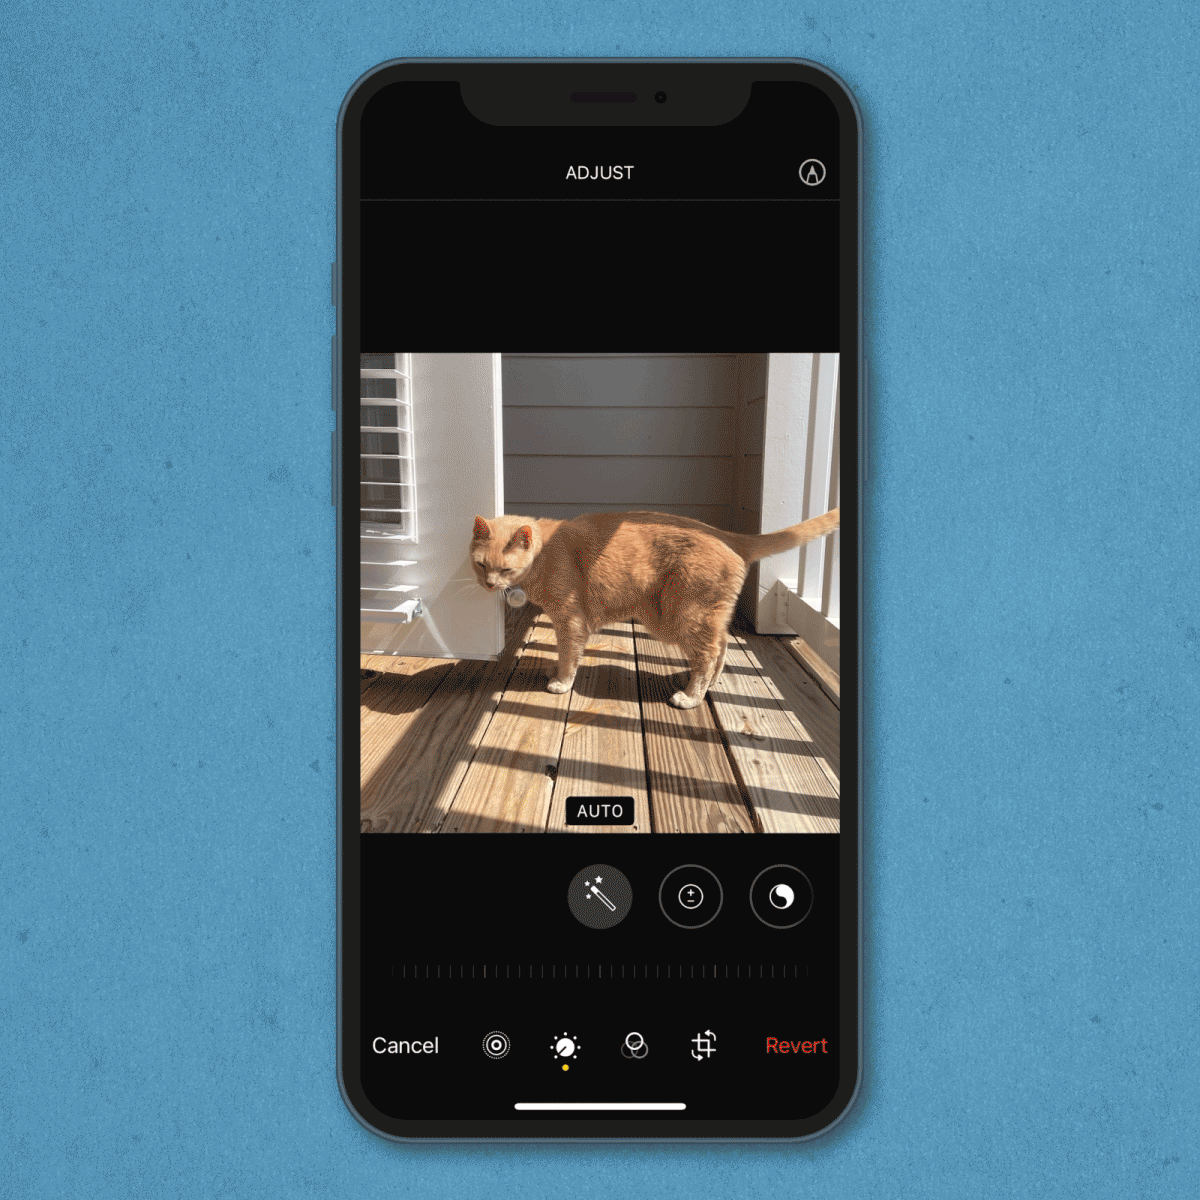 gif showing how to change aspect ratio on an iPhone